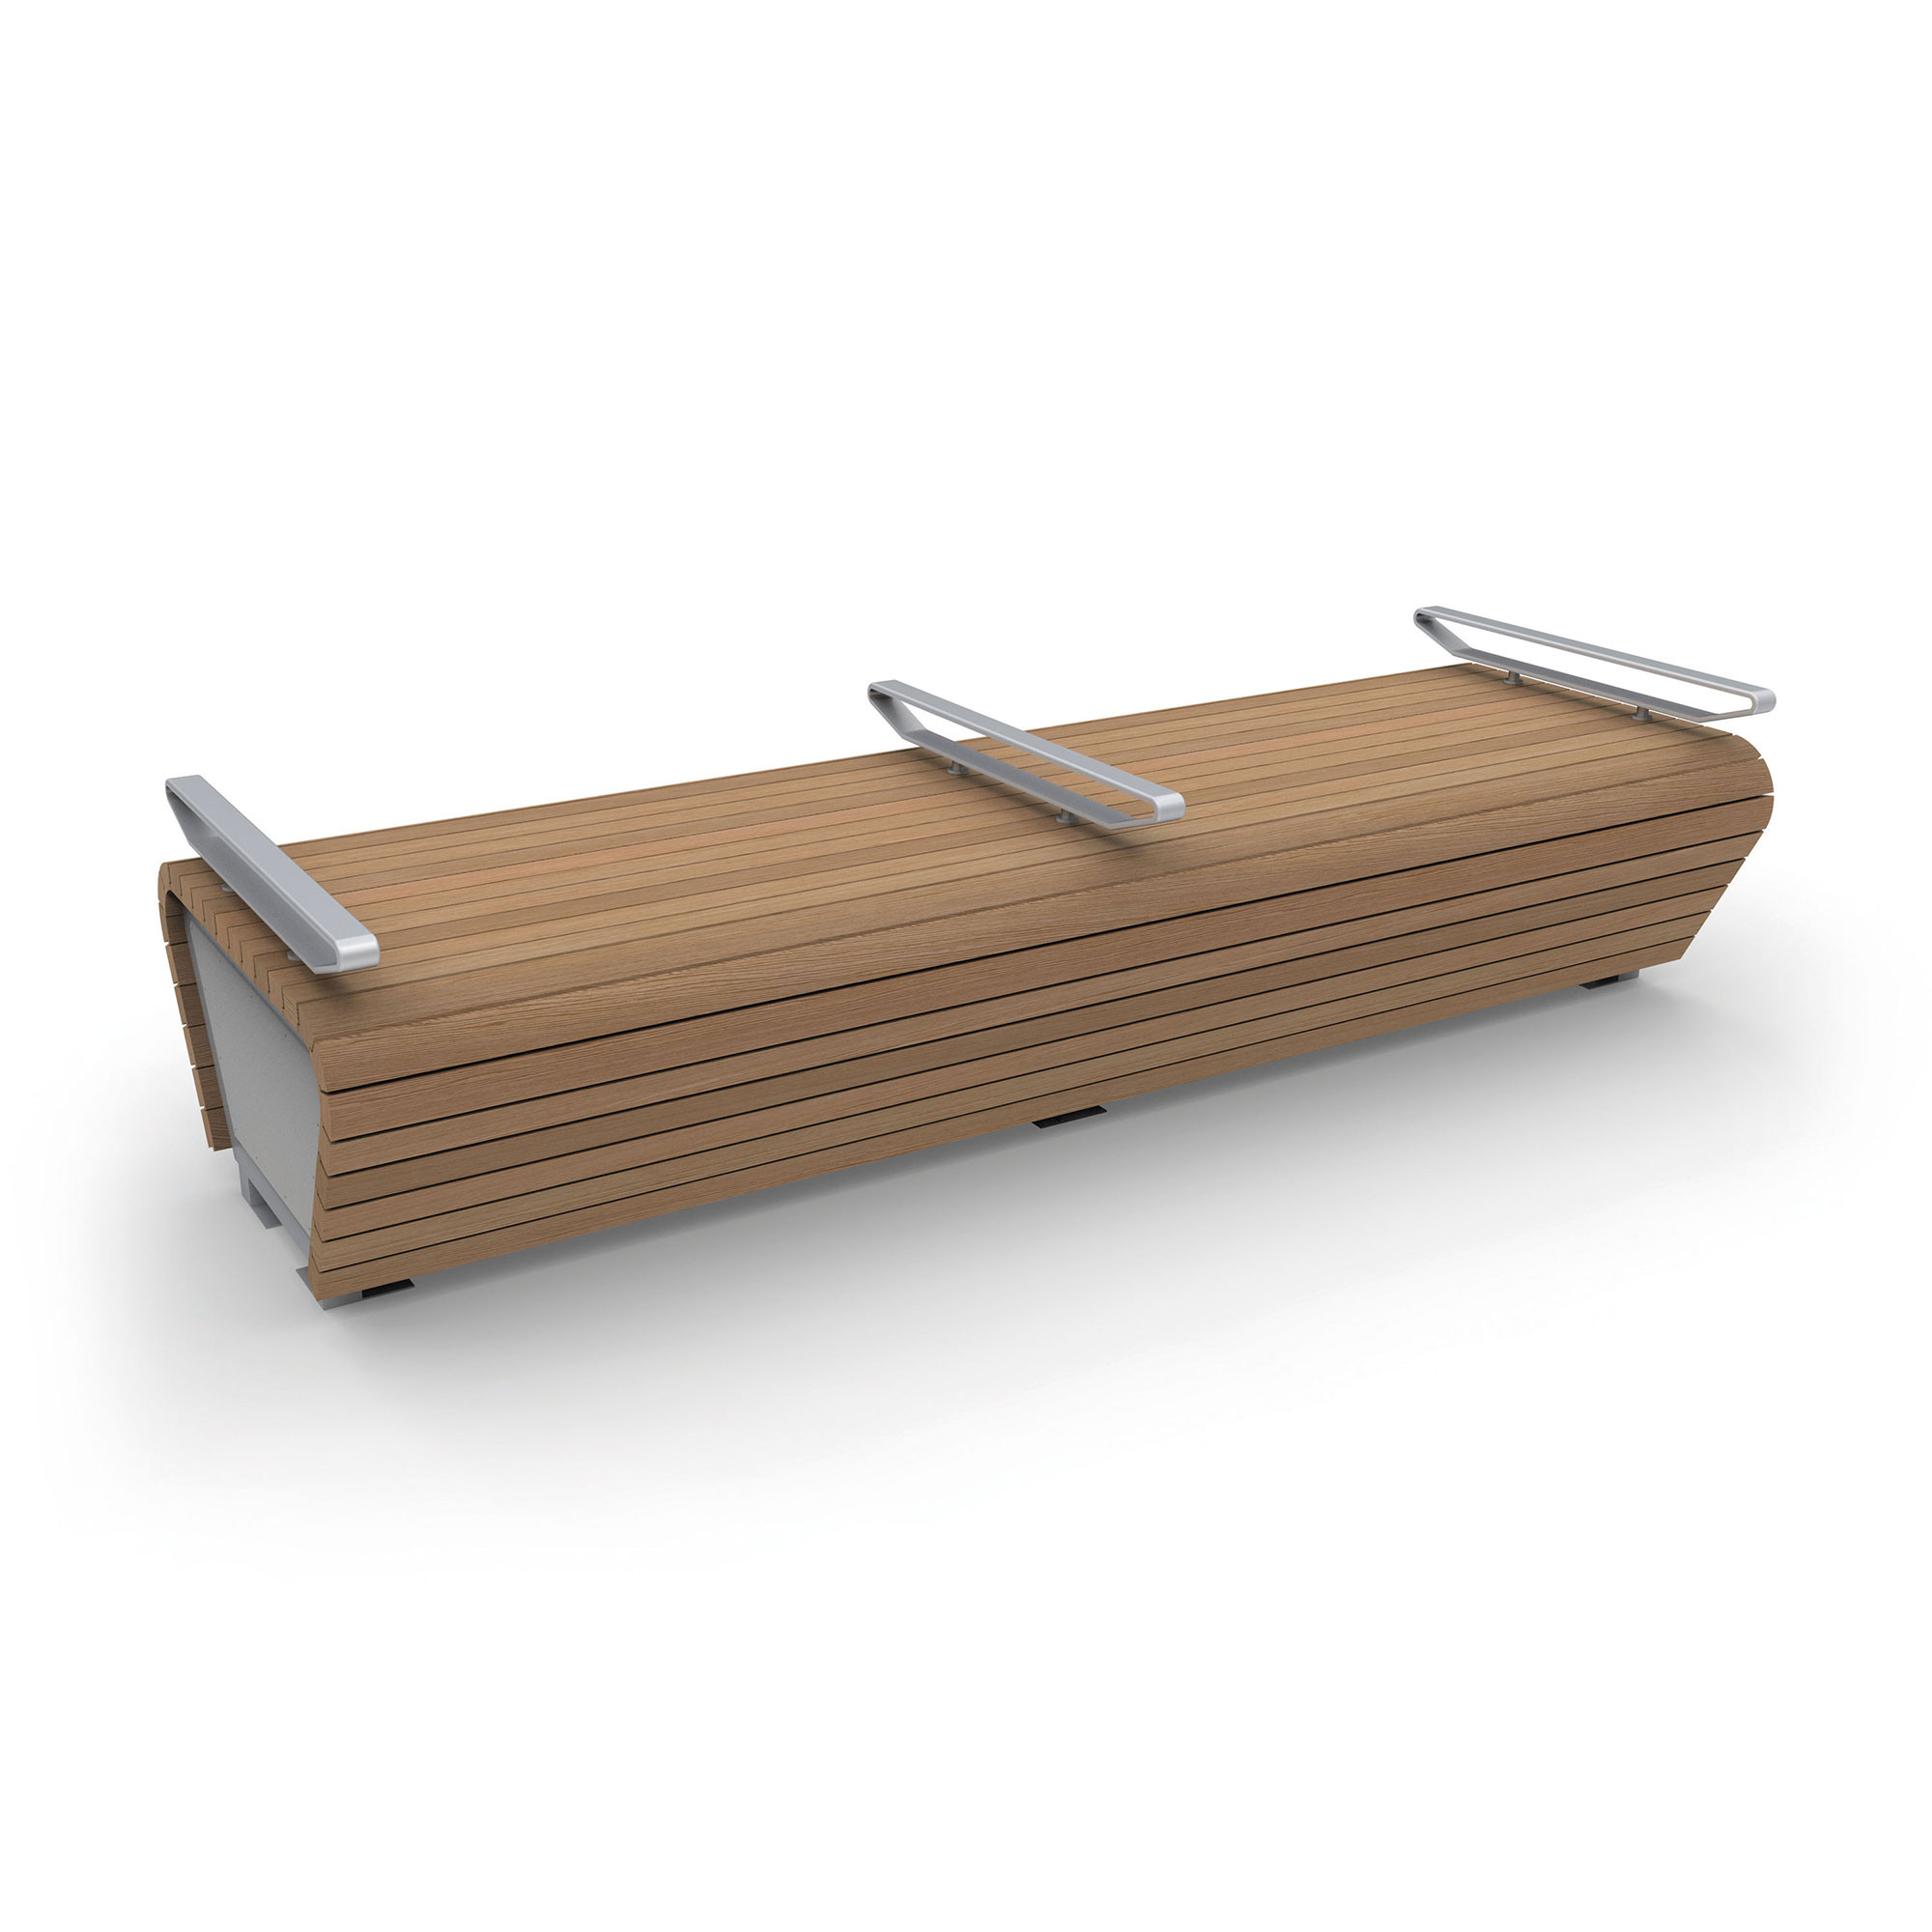 Pavilion Backless Bench : Trapezoid